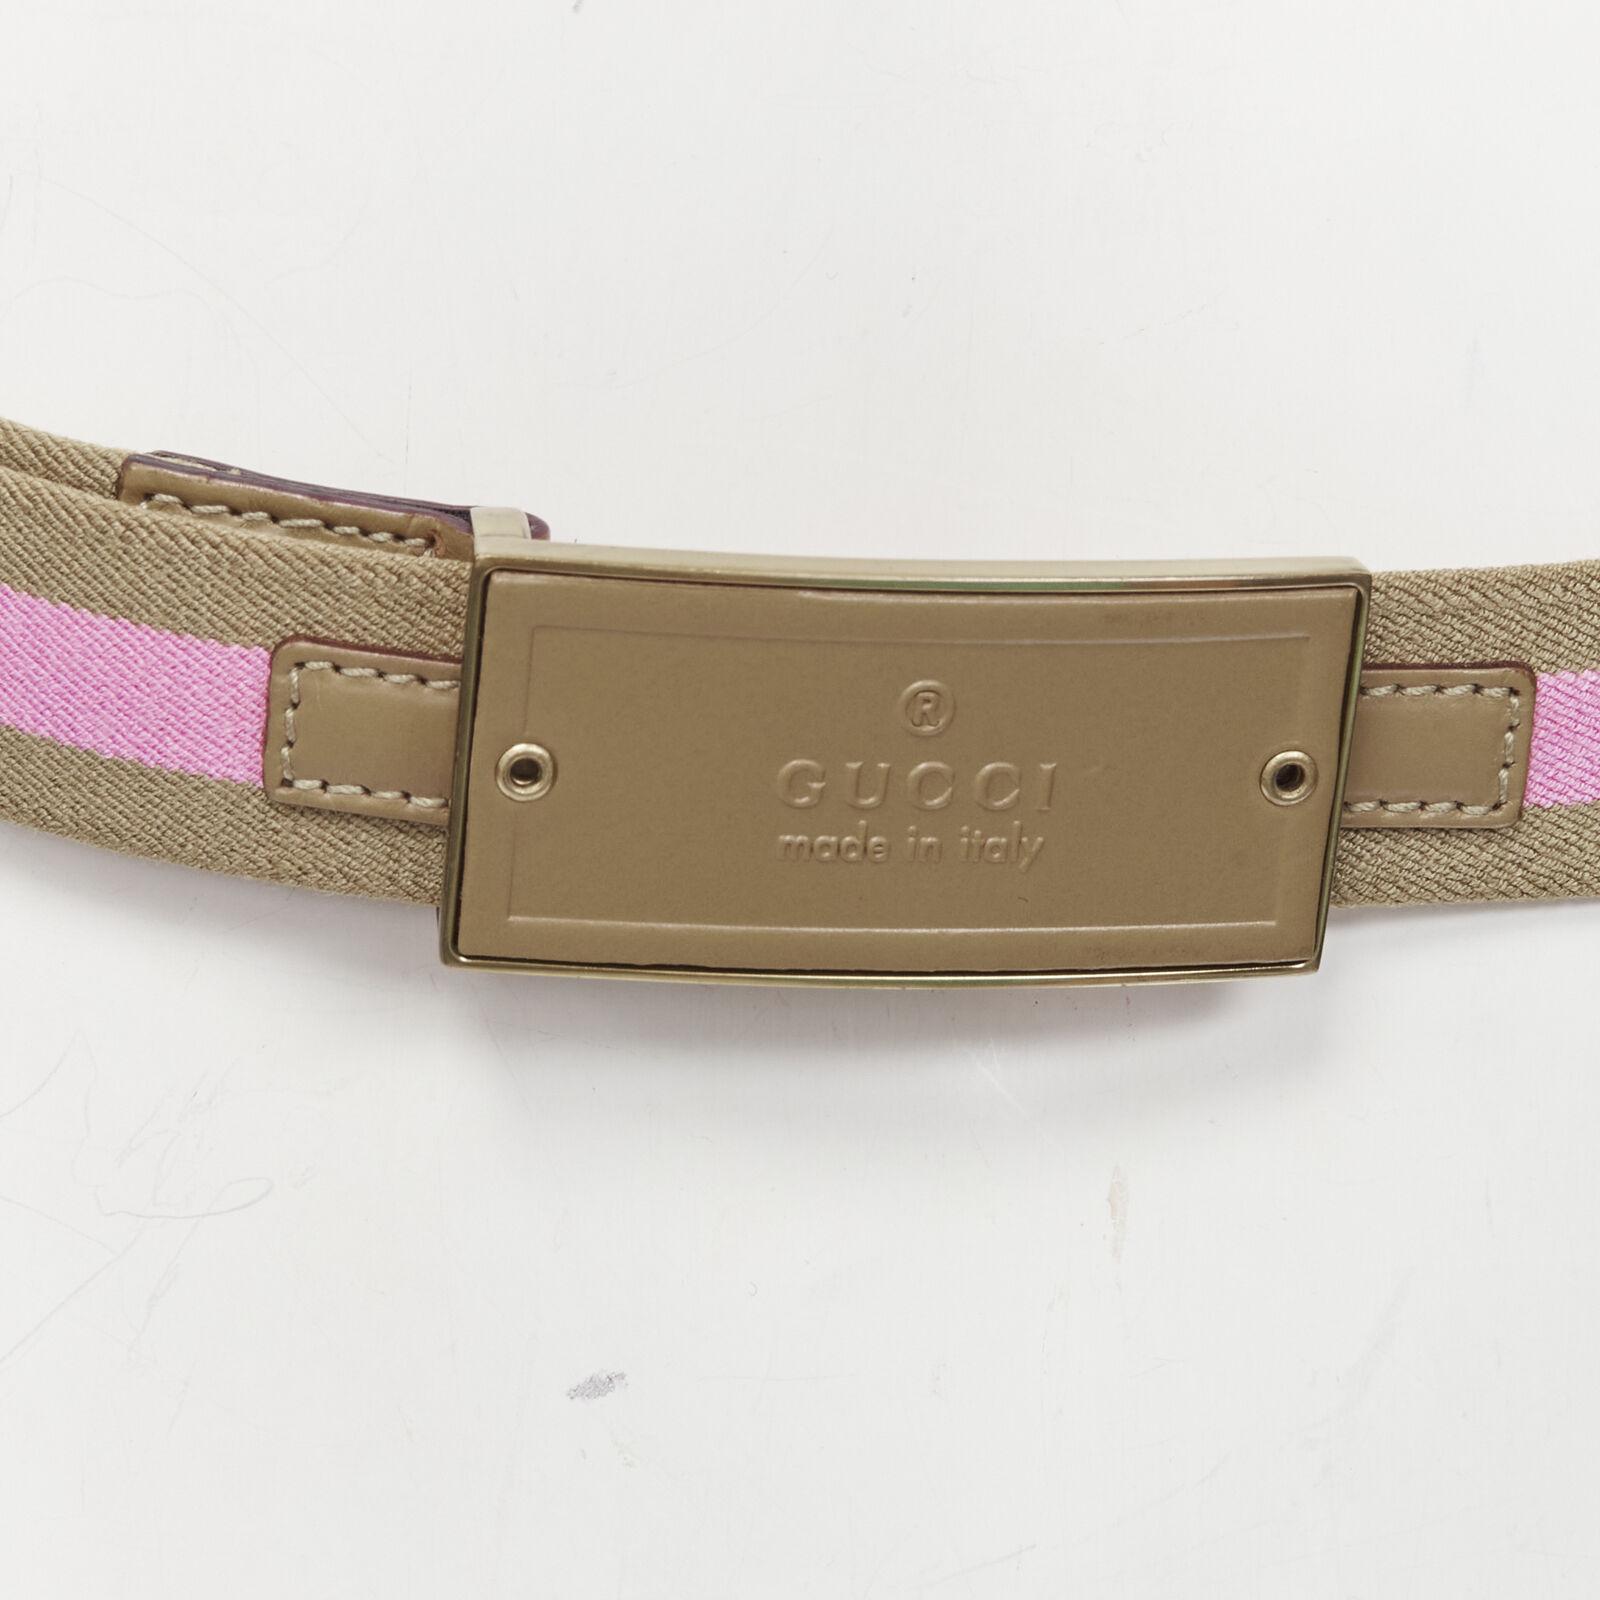 GUCCI Vintage Y2K pink khaki Web GG logo square buckle adjustable nylon belt
Reference: ANWU/A00864
Brand: Gucci
Material: Canvas
Color: Pink, Beige
Pattern: Striped
Closure: Belt
Made in: Italy

CONDITION:
Condition: Good, this item was pre-owned